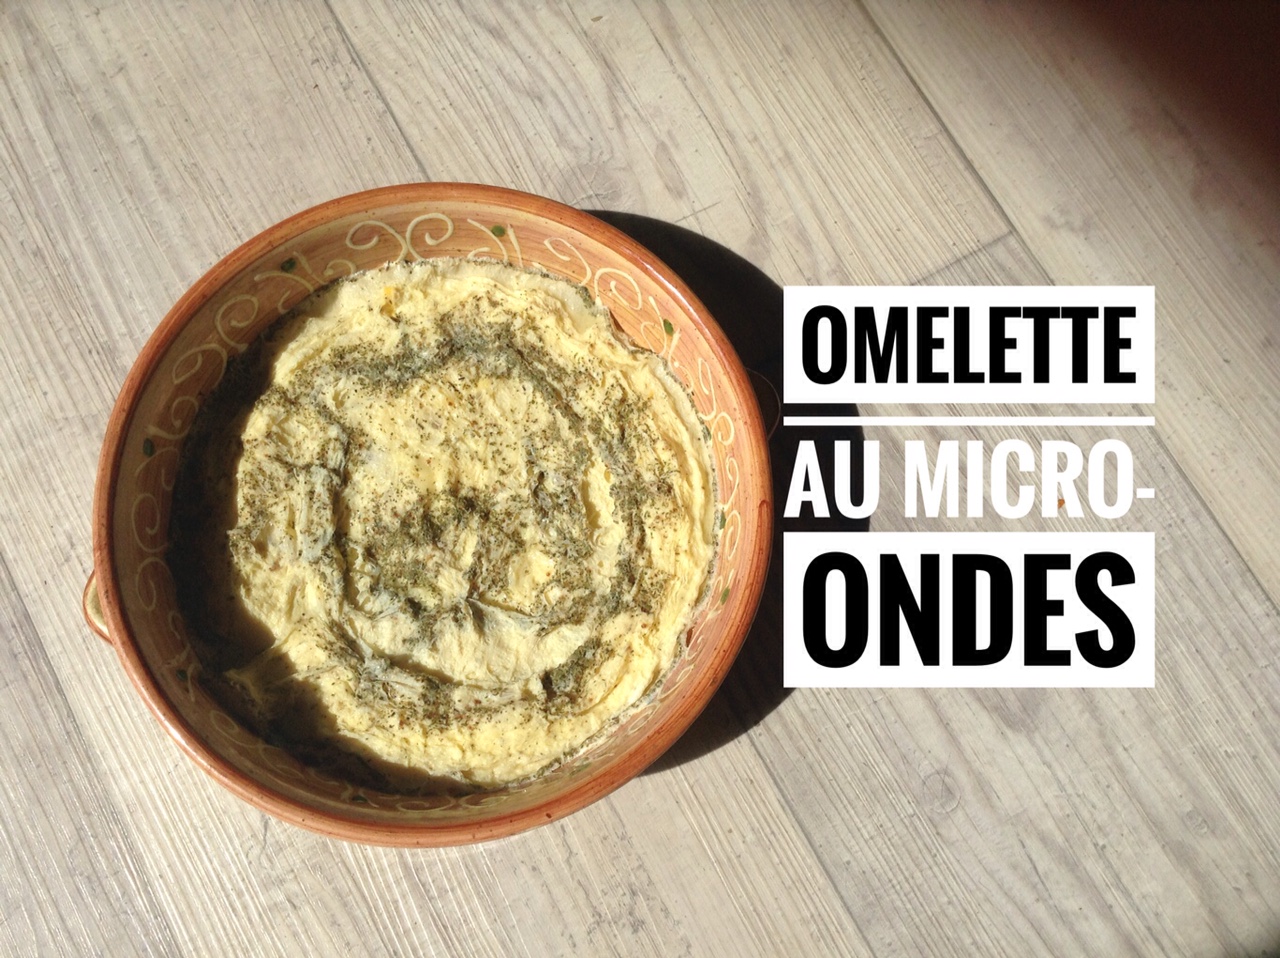 Omelette au micro ondes image